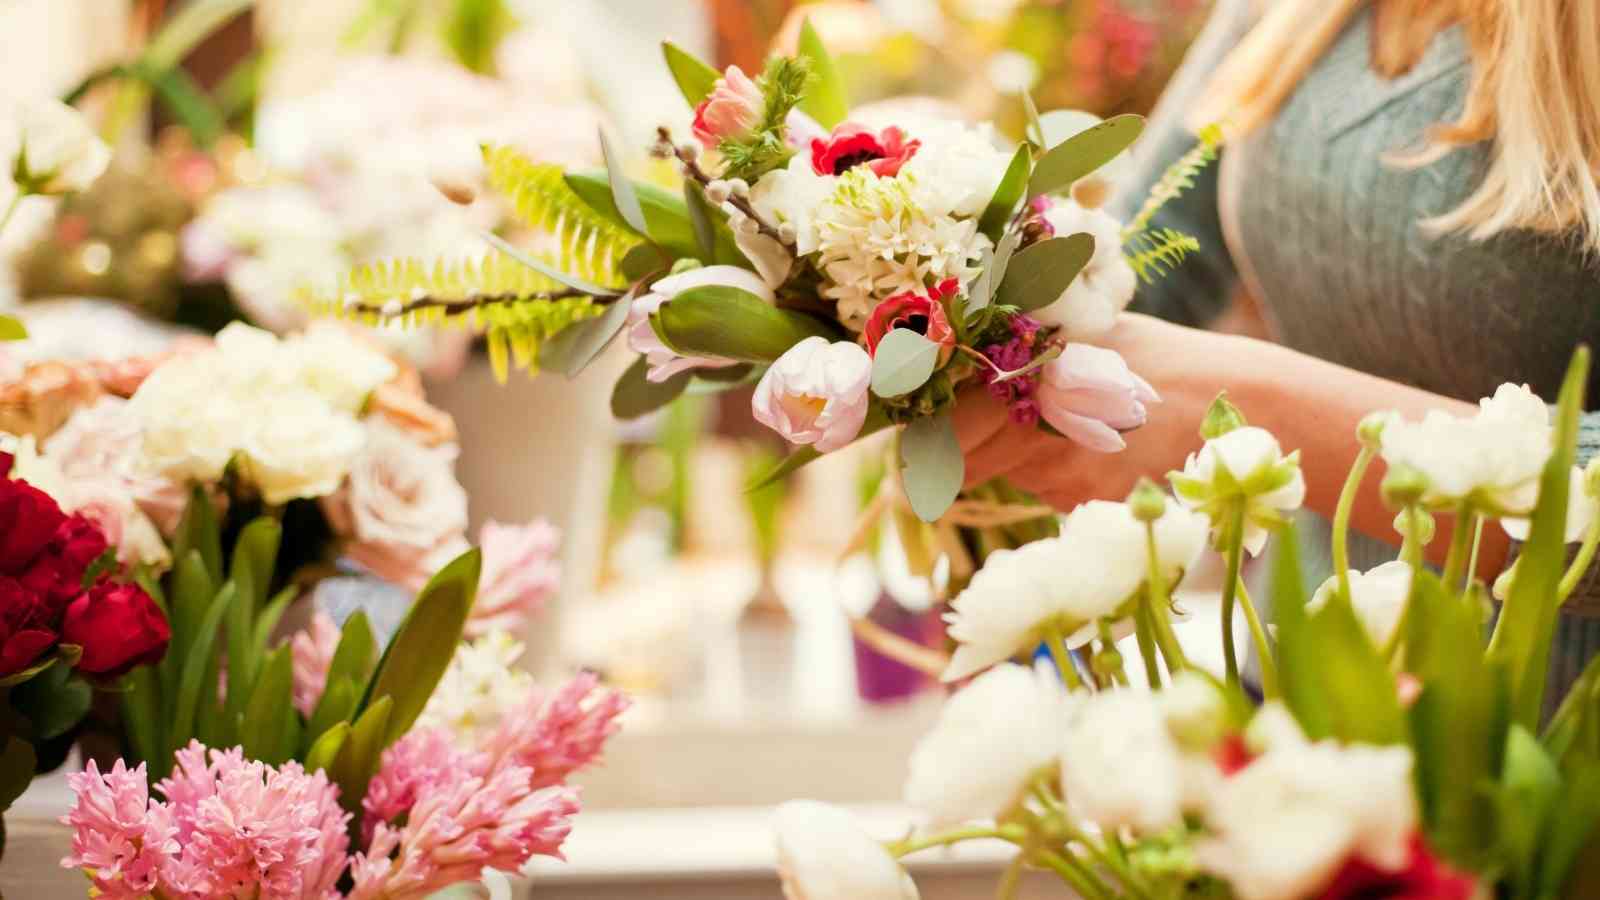 Best florists in Singapore for bouquets